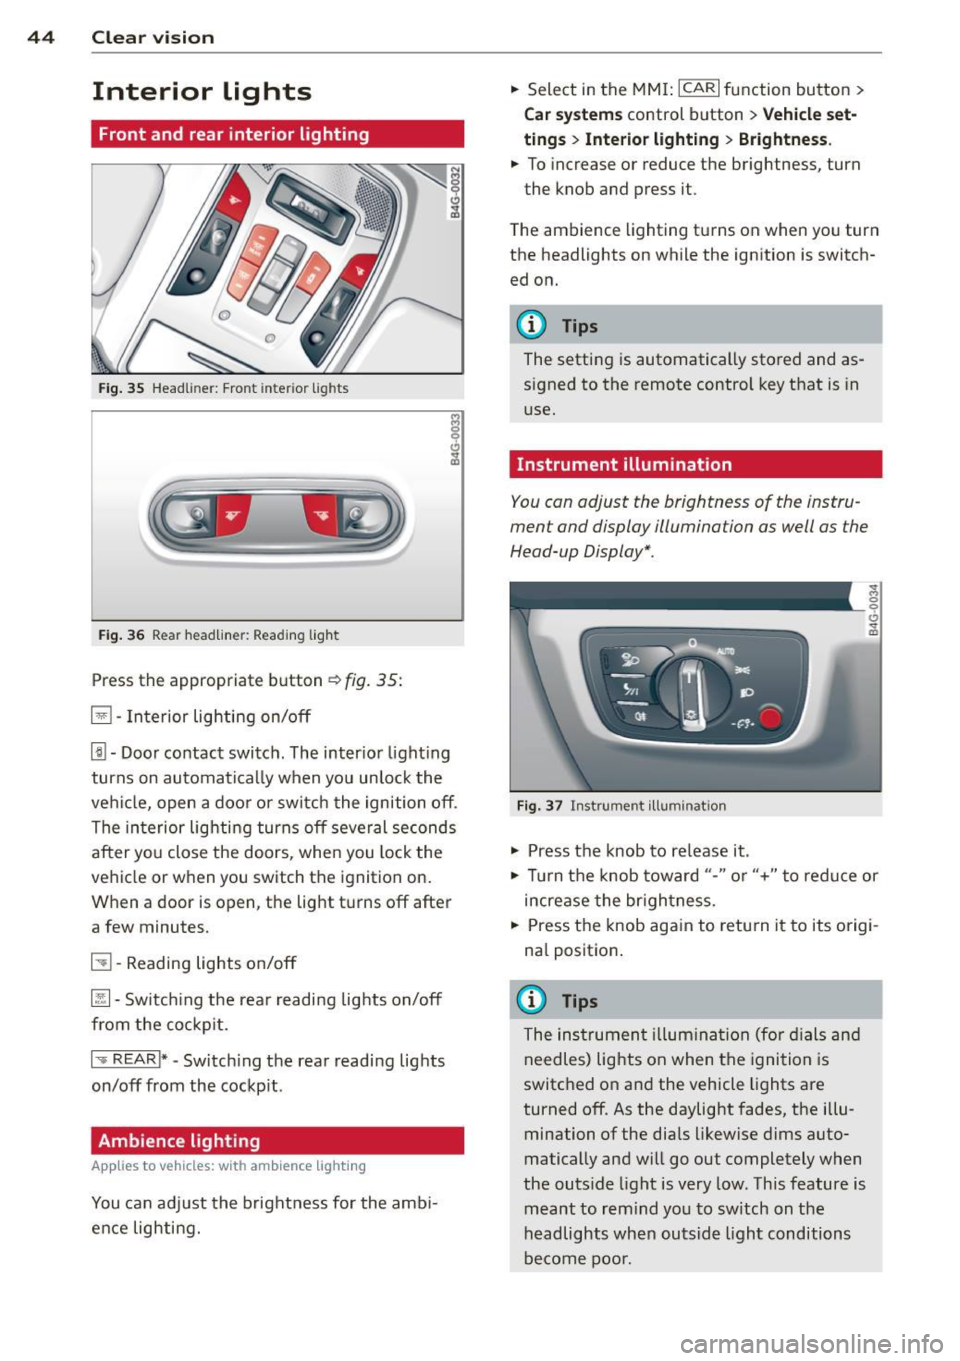 AUDI S6 2012 Service Manual 44  Clear vis ion 
Interior  lights 
Front  and  rear  interior lighting 
Fig. 35 Head liner:  Fron t  int eri or  ligh ts 
Fig. 36 Rear  headlin er: R ead in g  light 
Press  the  appropriate  b utto